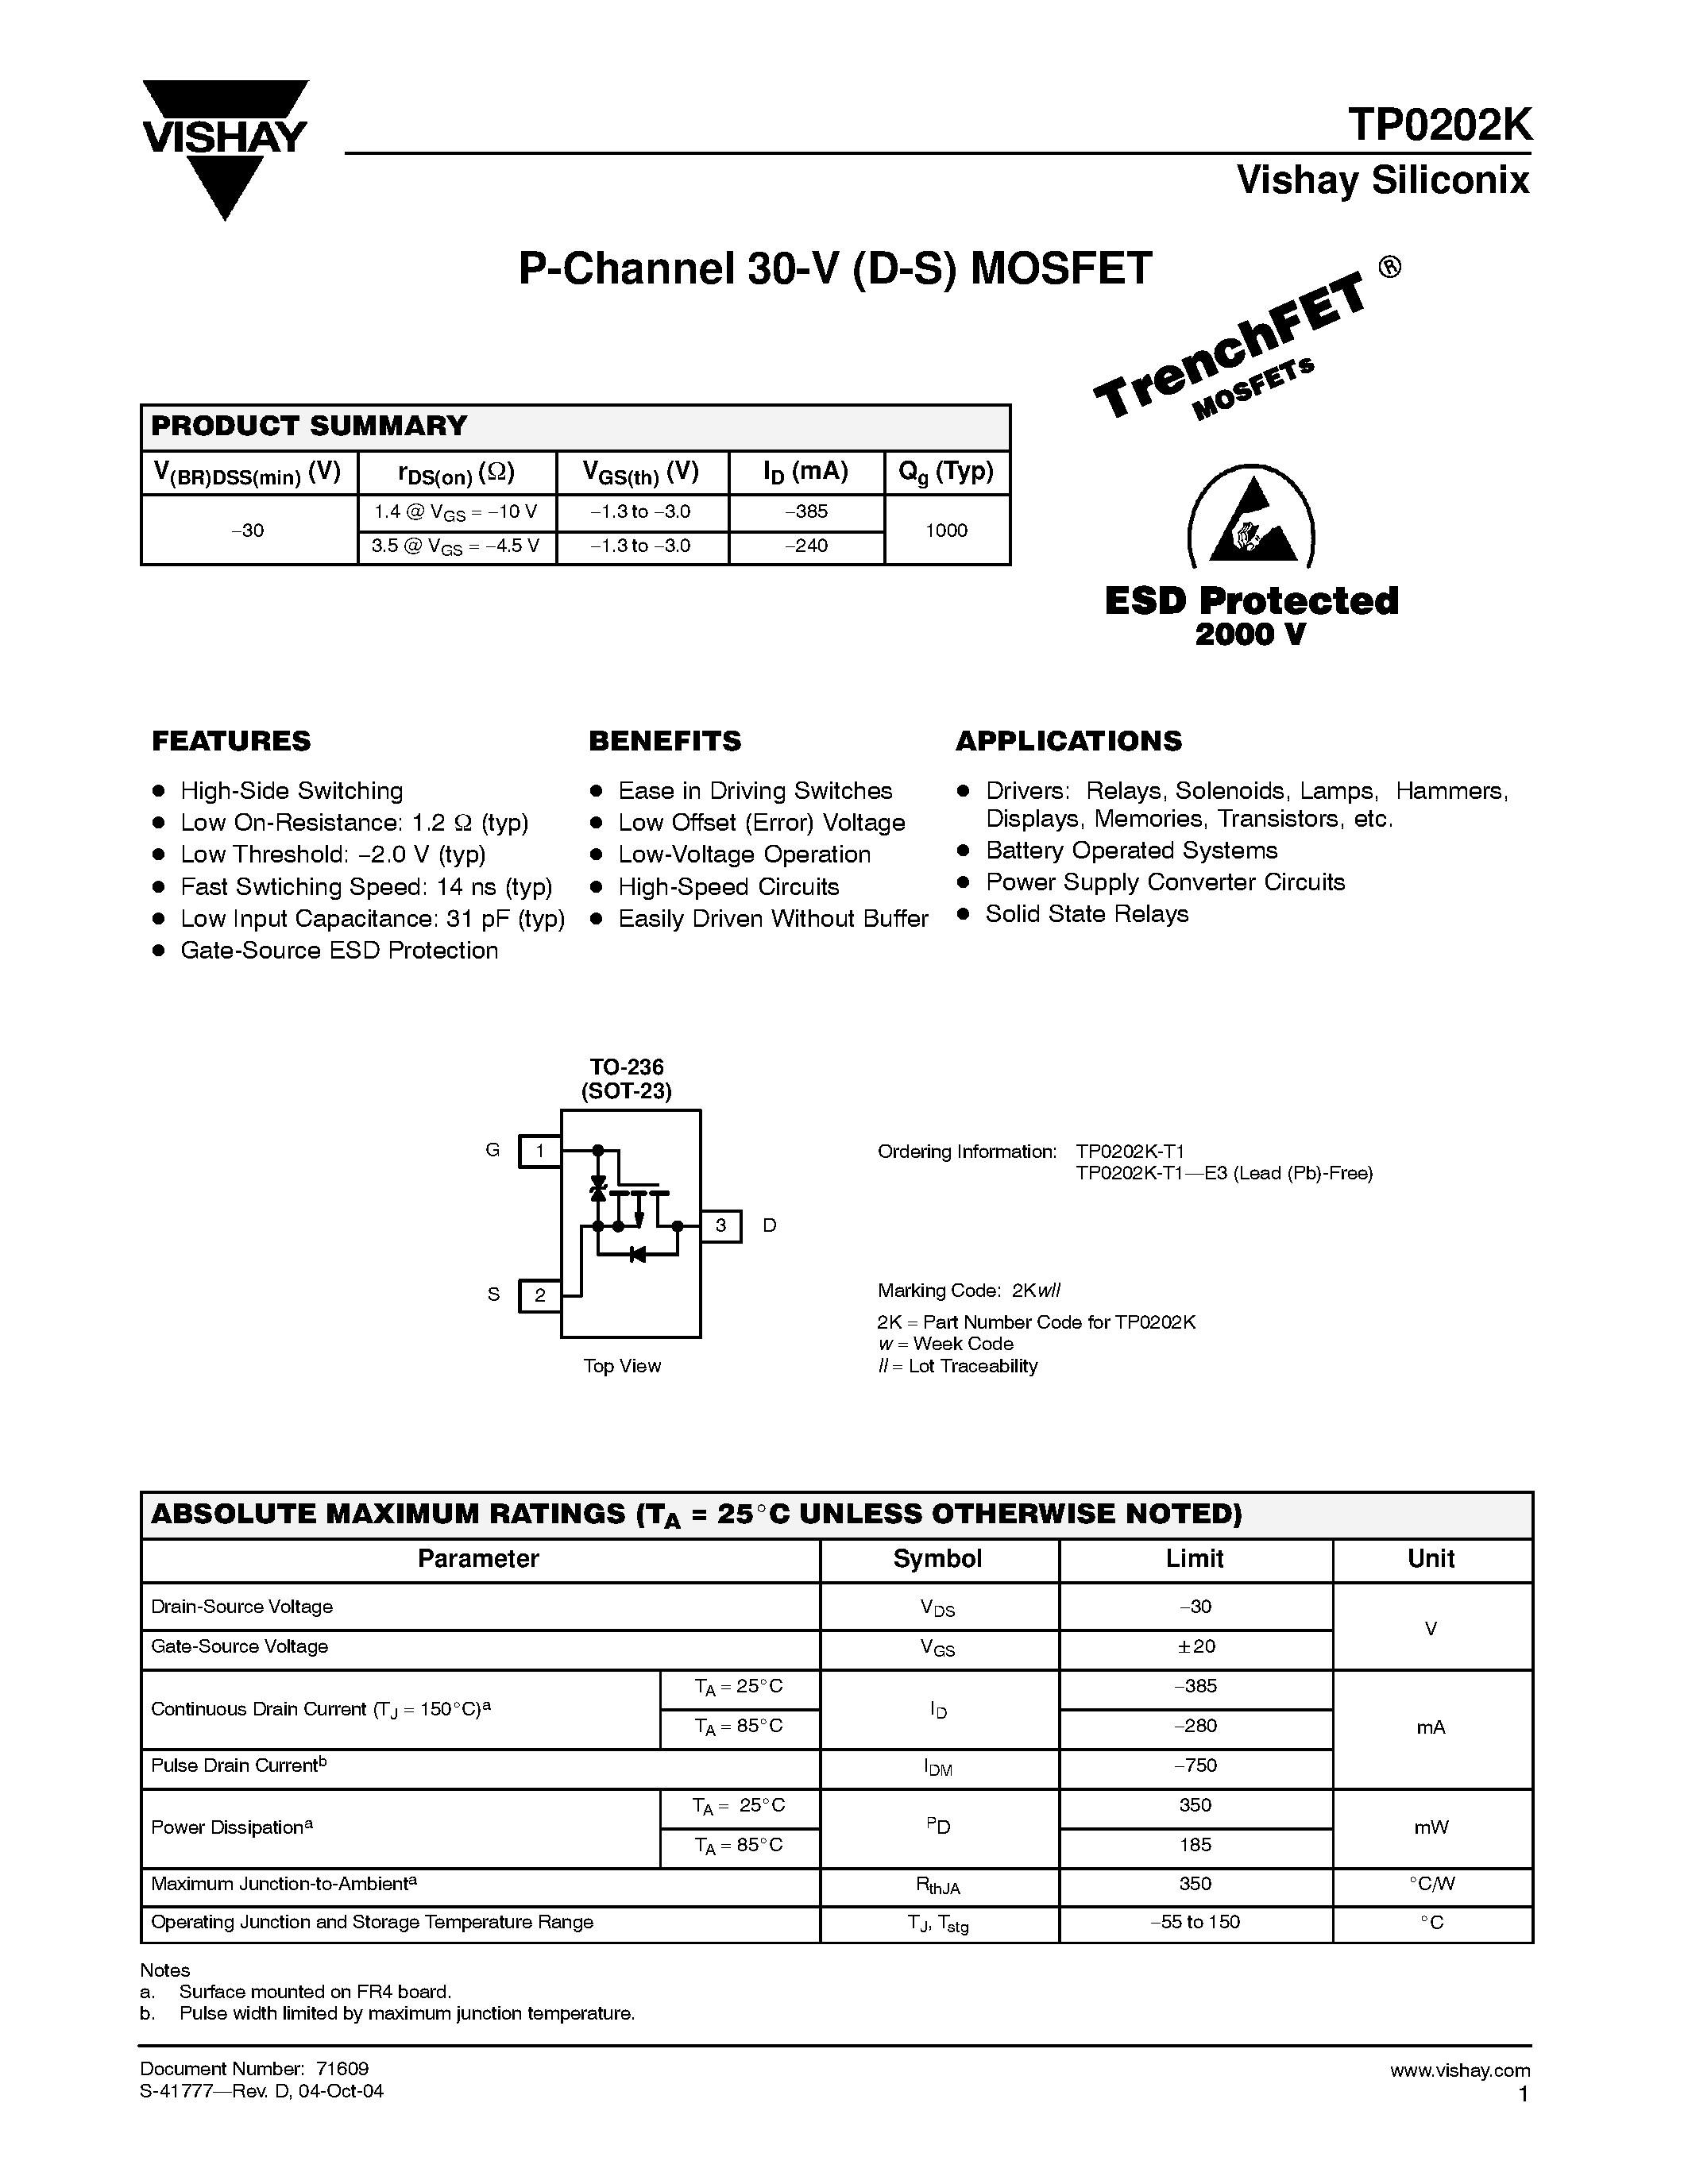 Datasheet TP0202K-T1 - P-Channel 30-V (D-S) MOSFET page 1